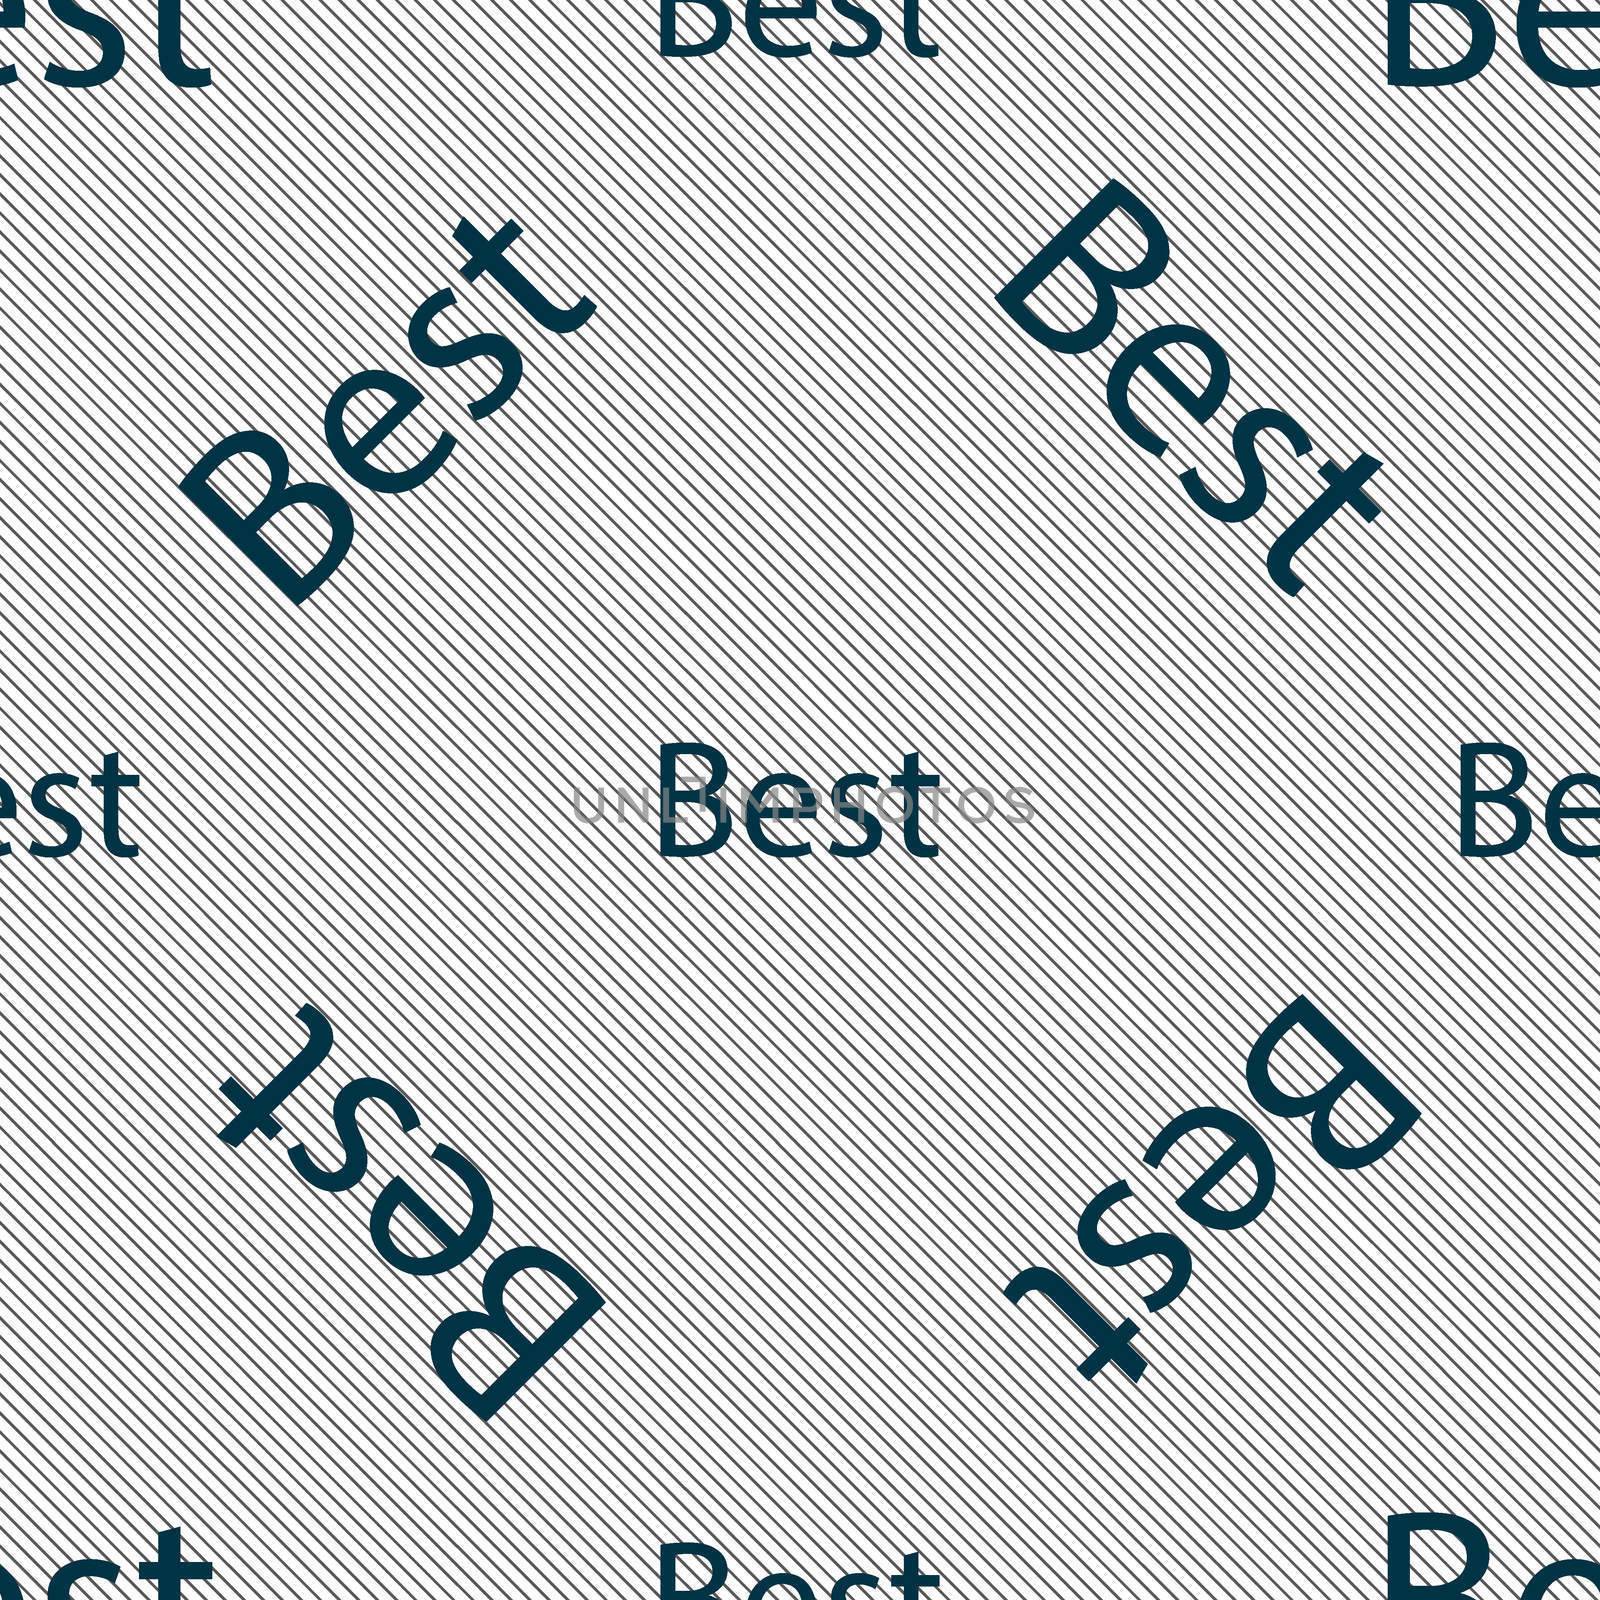 Best seller sign icon. Best-seller award symbol. Seamless pattern with geometric texture.  by serhii_lohvyniuk